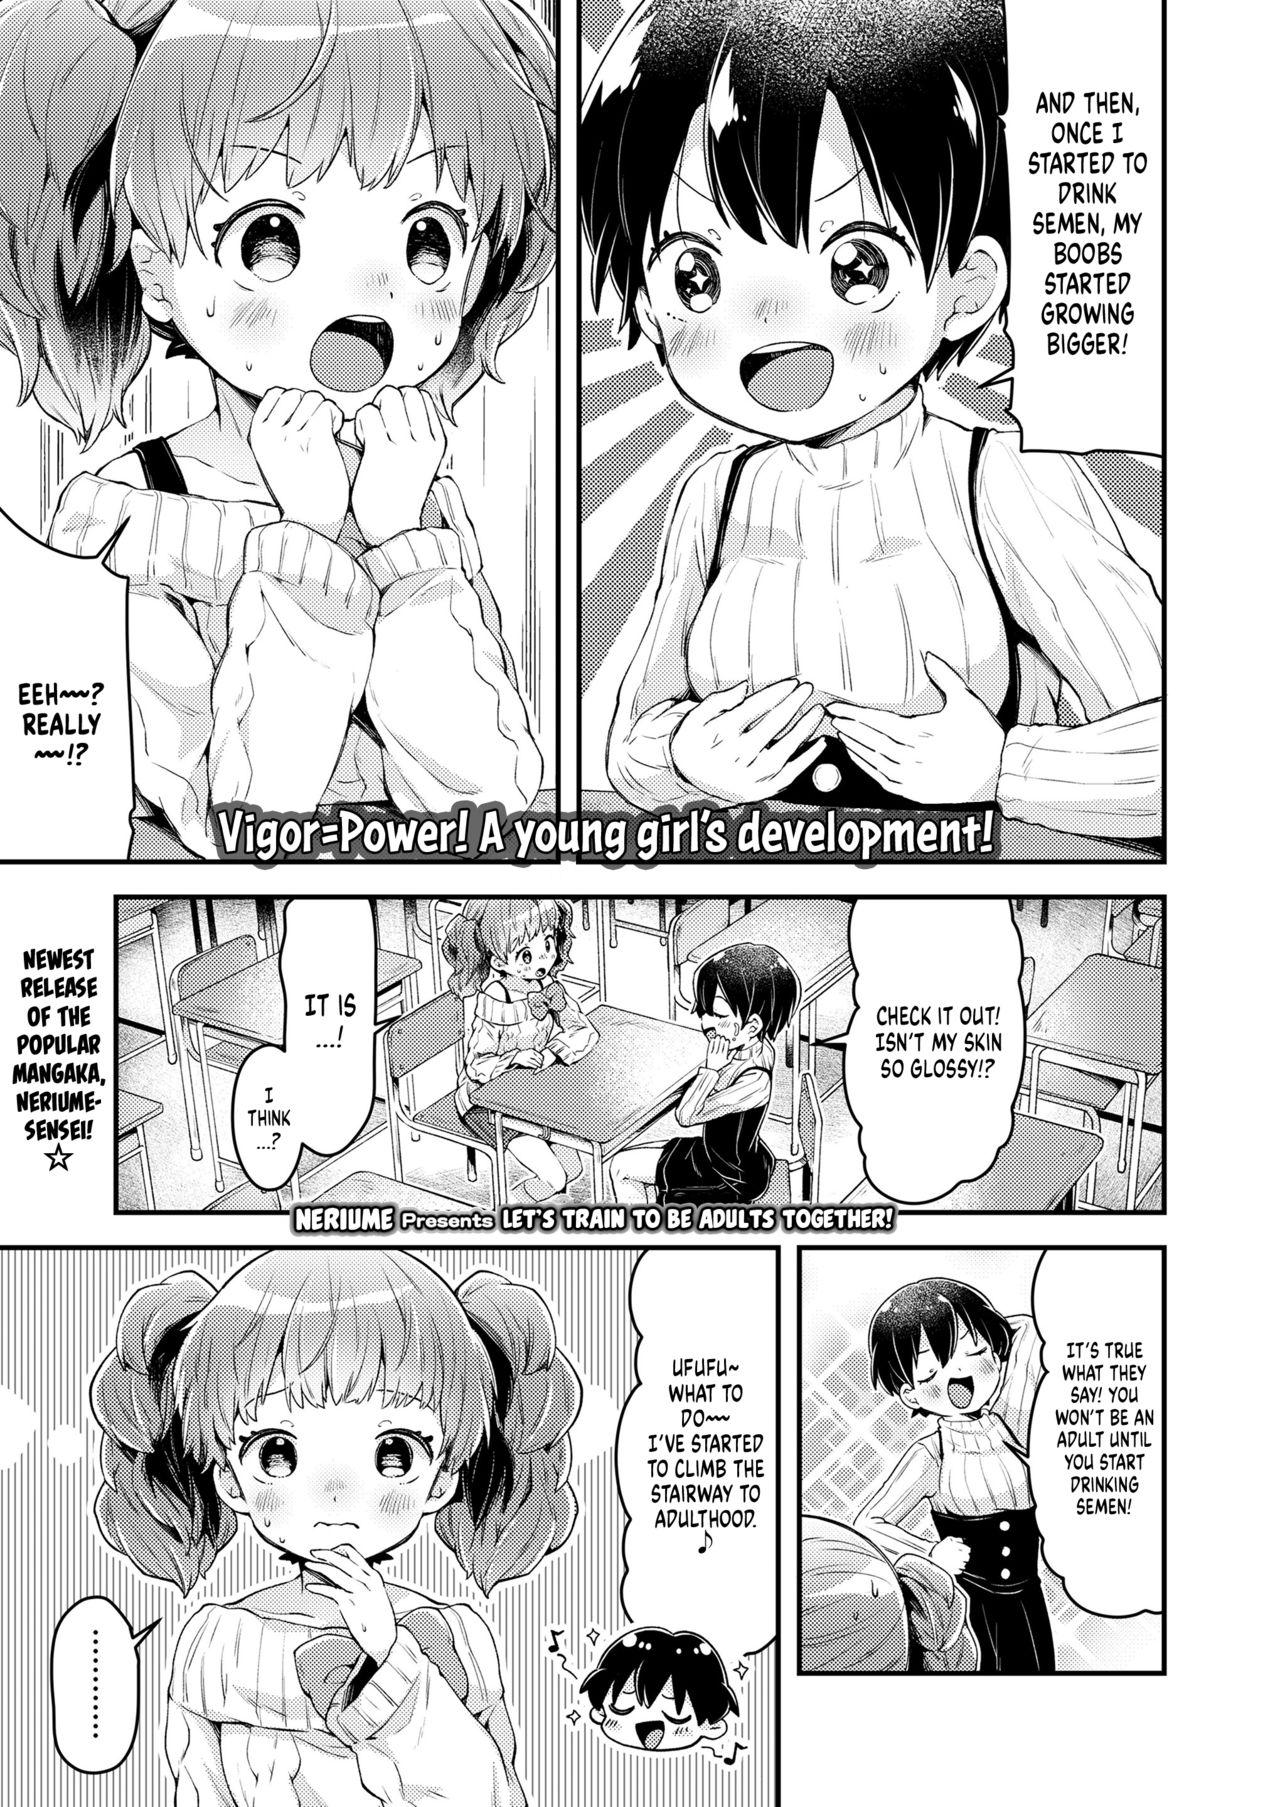 Rope Issho ni Otona Training! | Let's Train to be Adults Together! Petite - Page 1